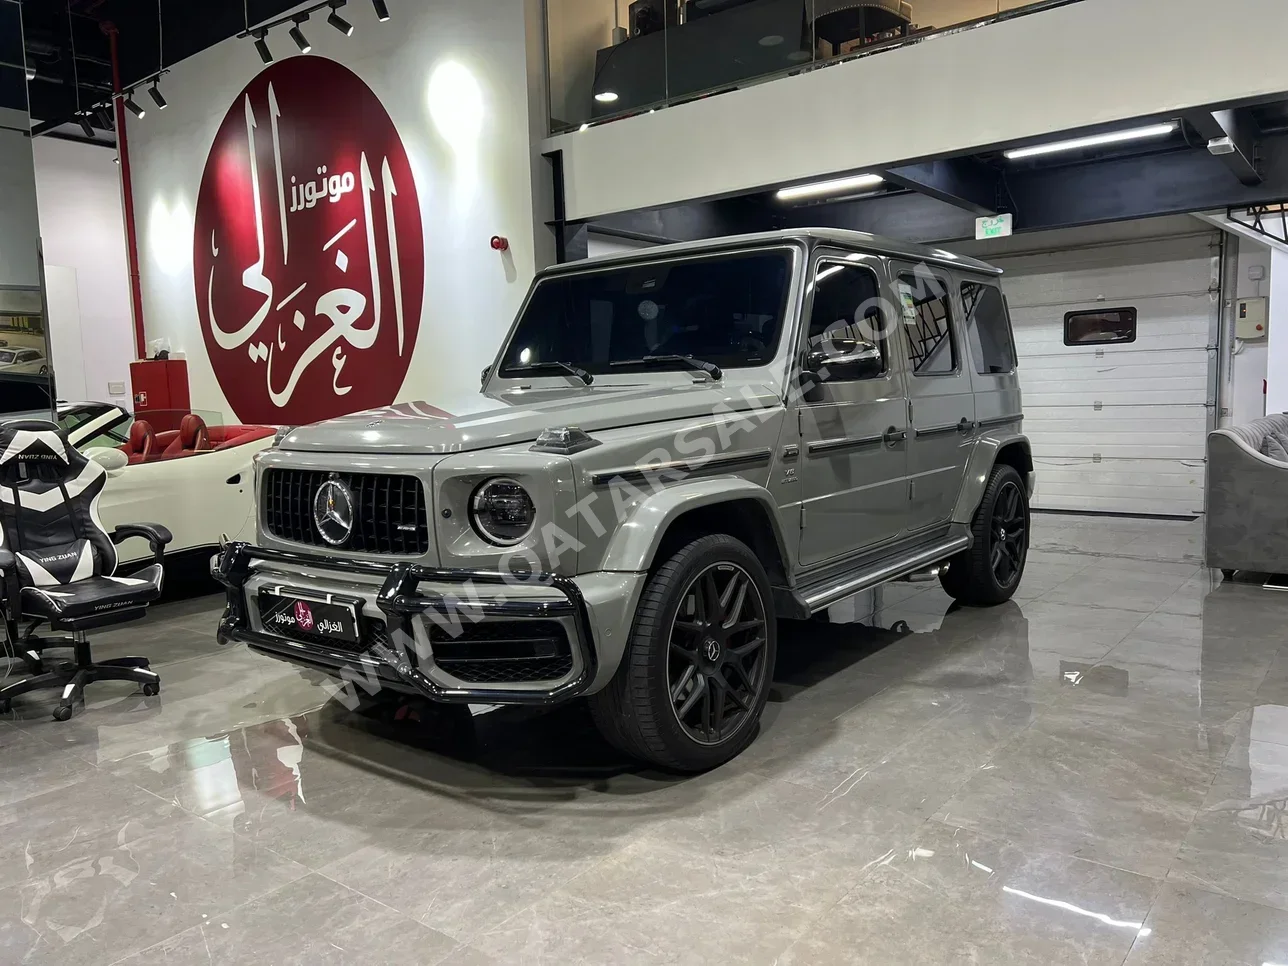 Mercedes-Benz  G-Class  500  2019  Automatic  107,000 Km  8 Cylinder  Four Wheel Drive (4WD)  SUV  Gray